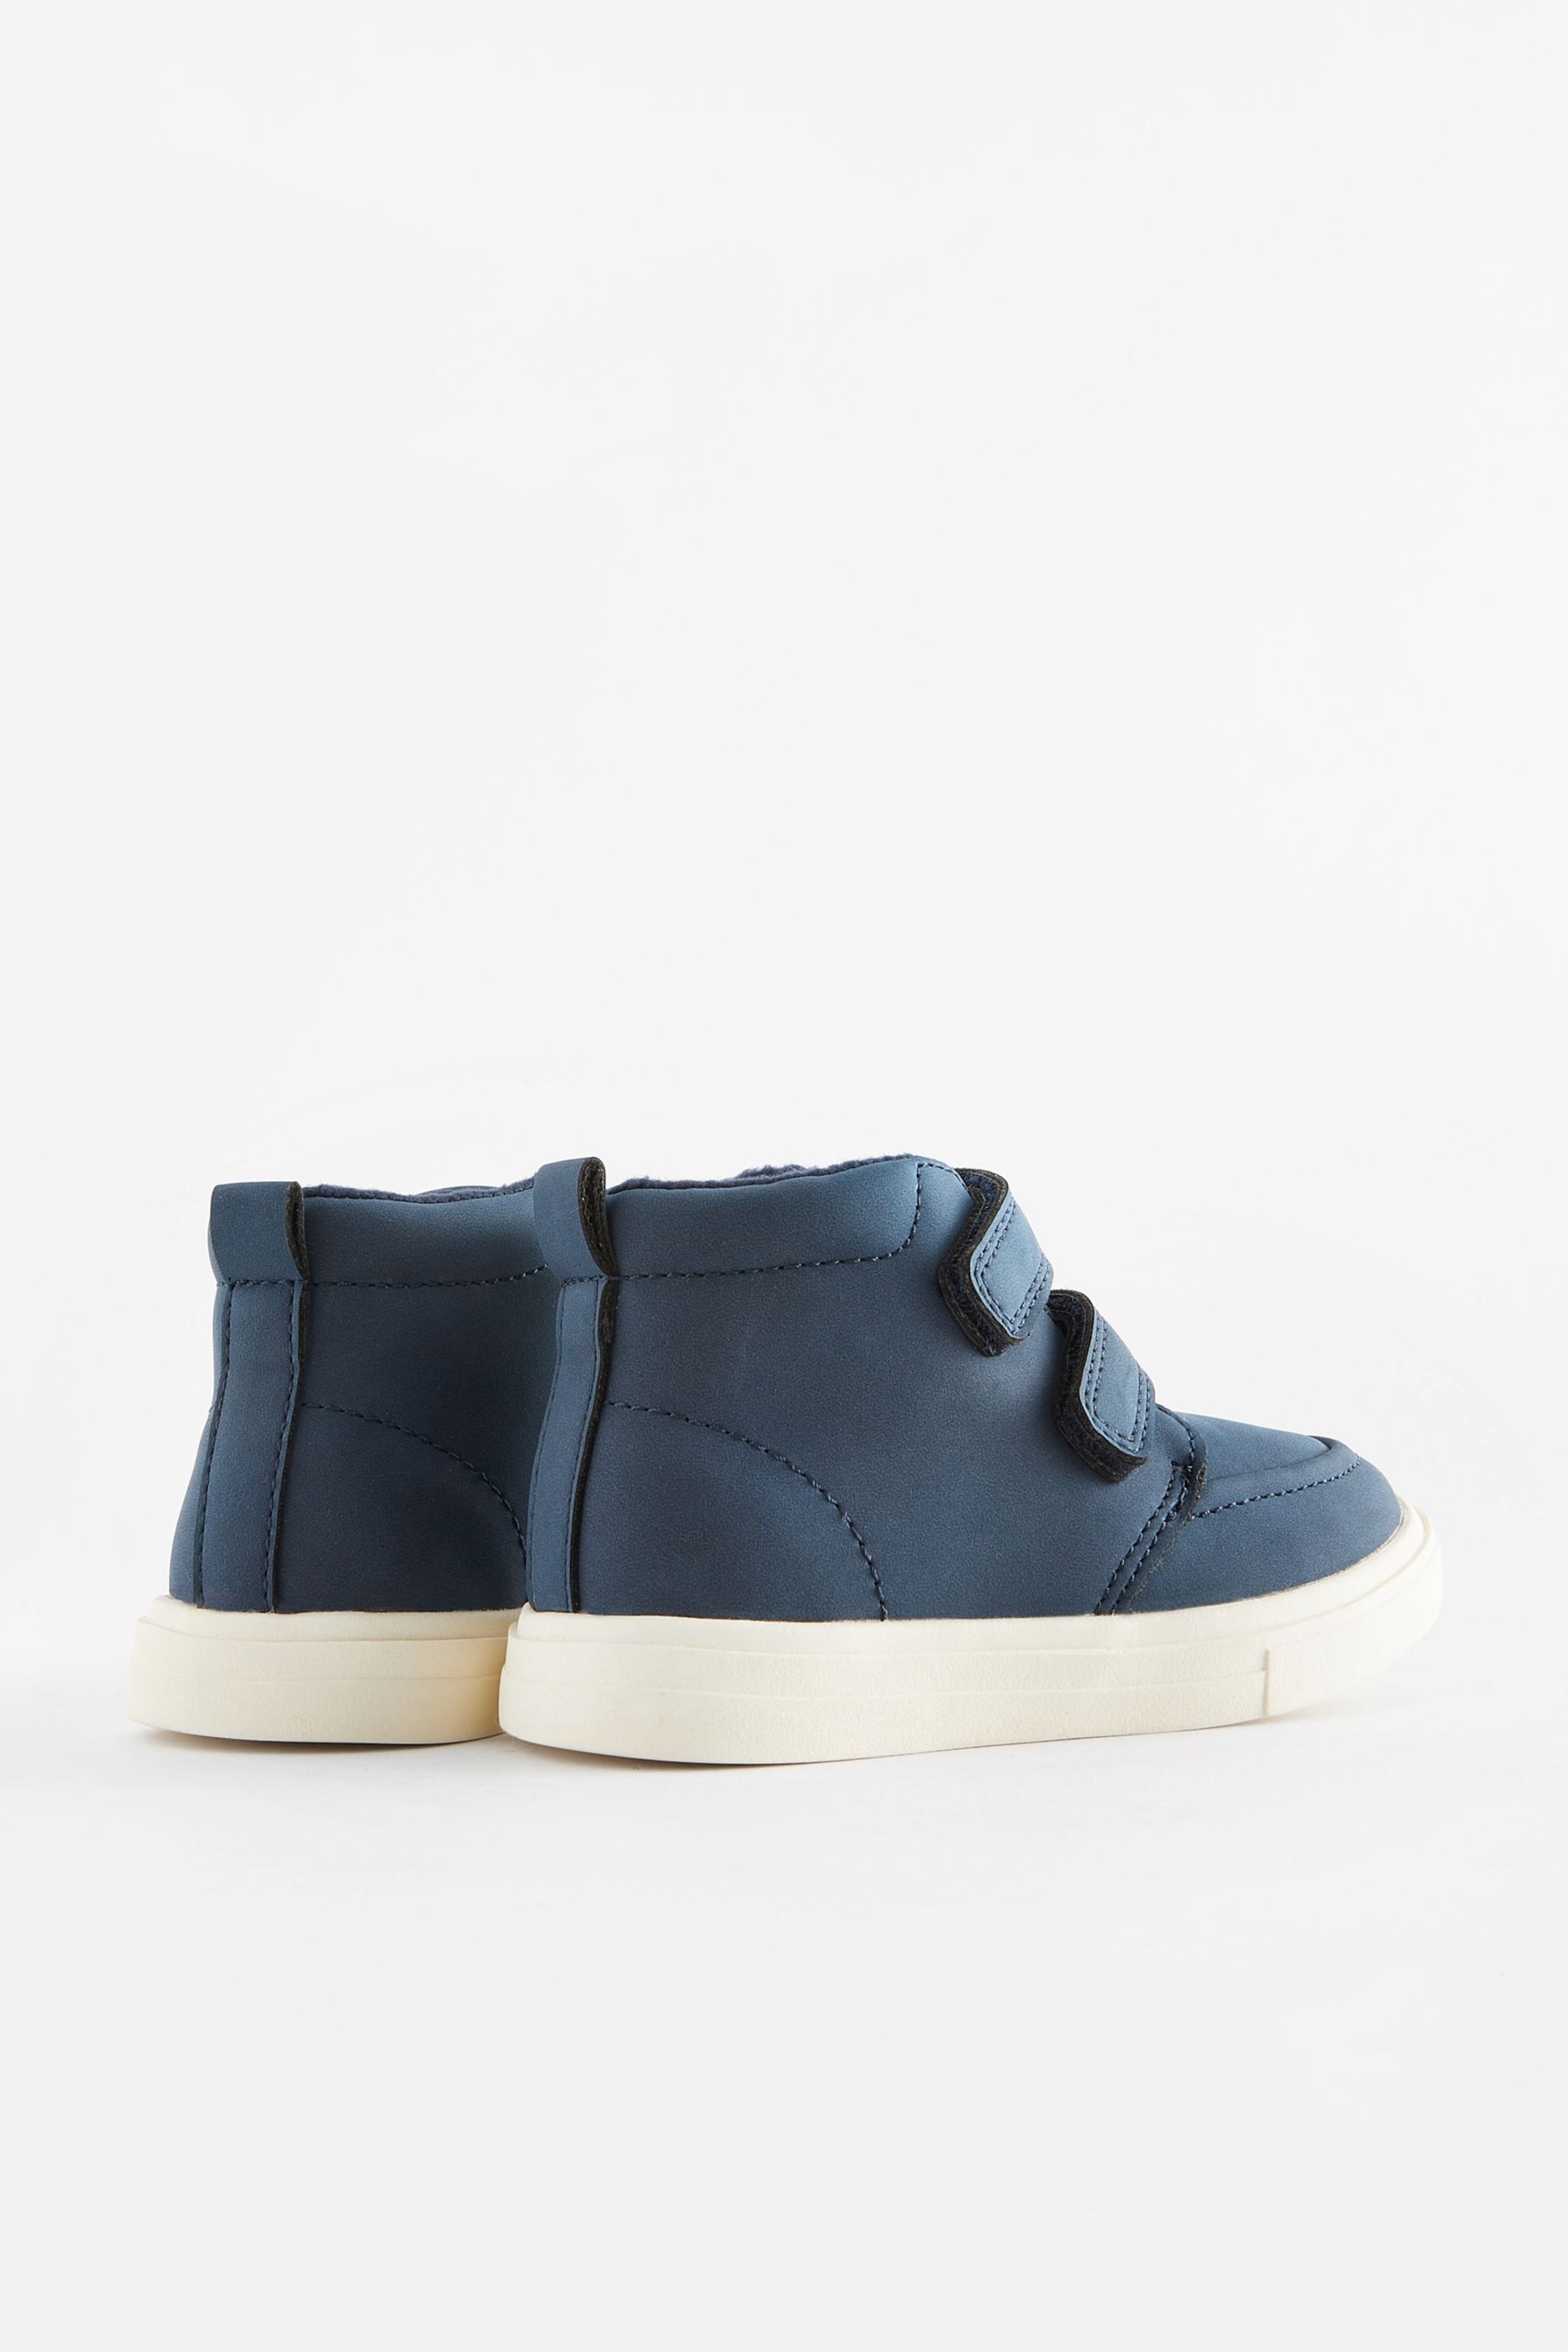 Navy Blue With Off White Sole Standard Fit (F) Warm Lined Touch Fastening Boots - Image 3 of 5